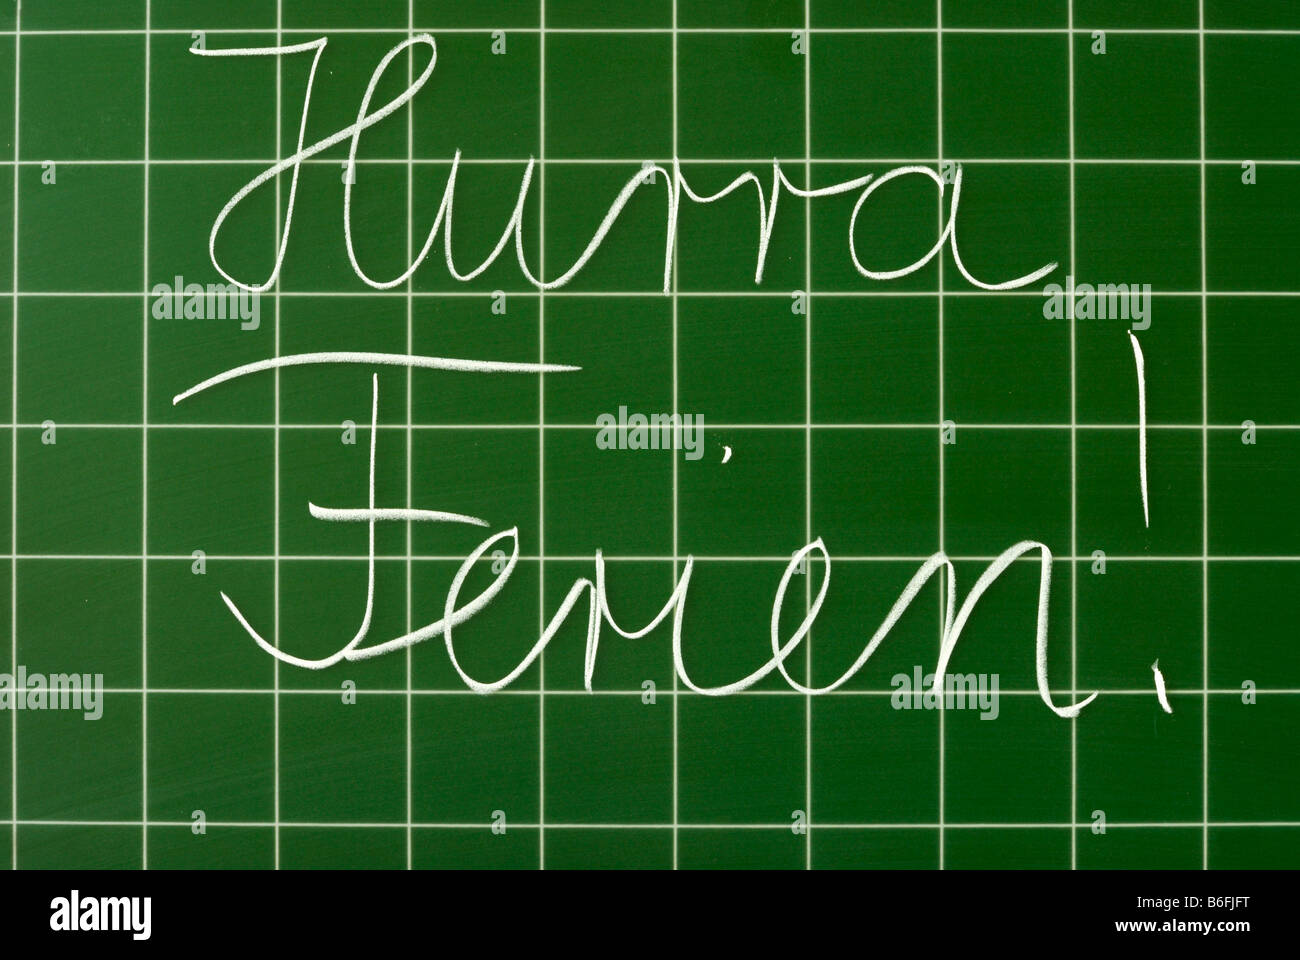 German handwritten text on a chalkboard with grid, Hurra Ferien!, Hooray for holidays! Stock Photo